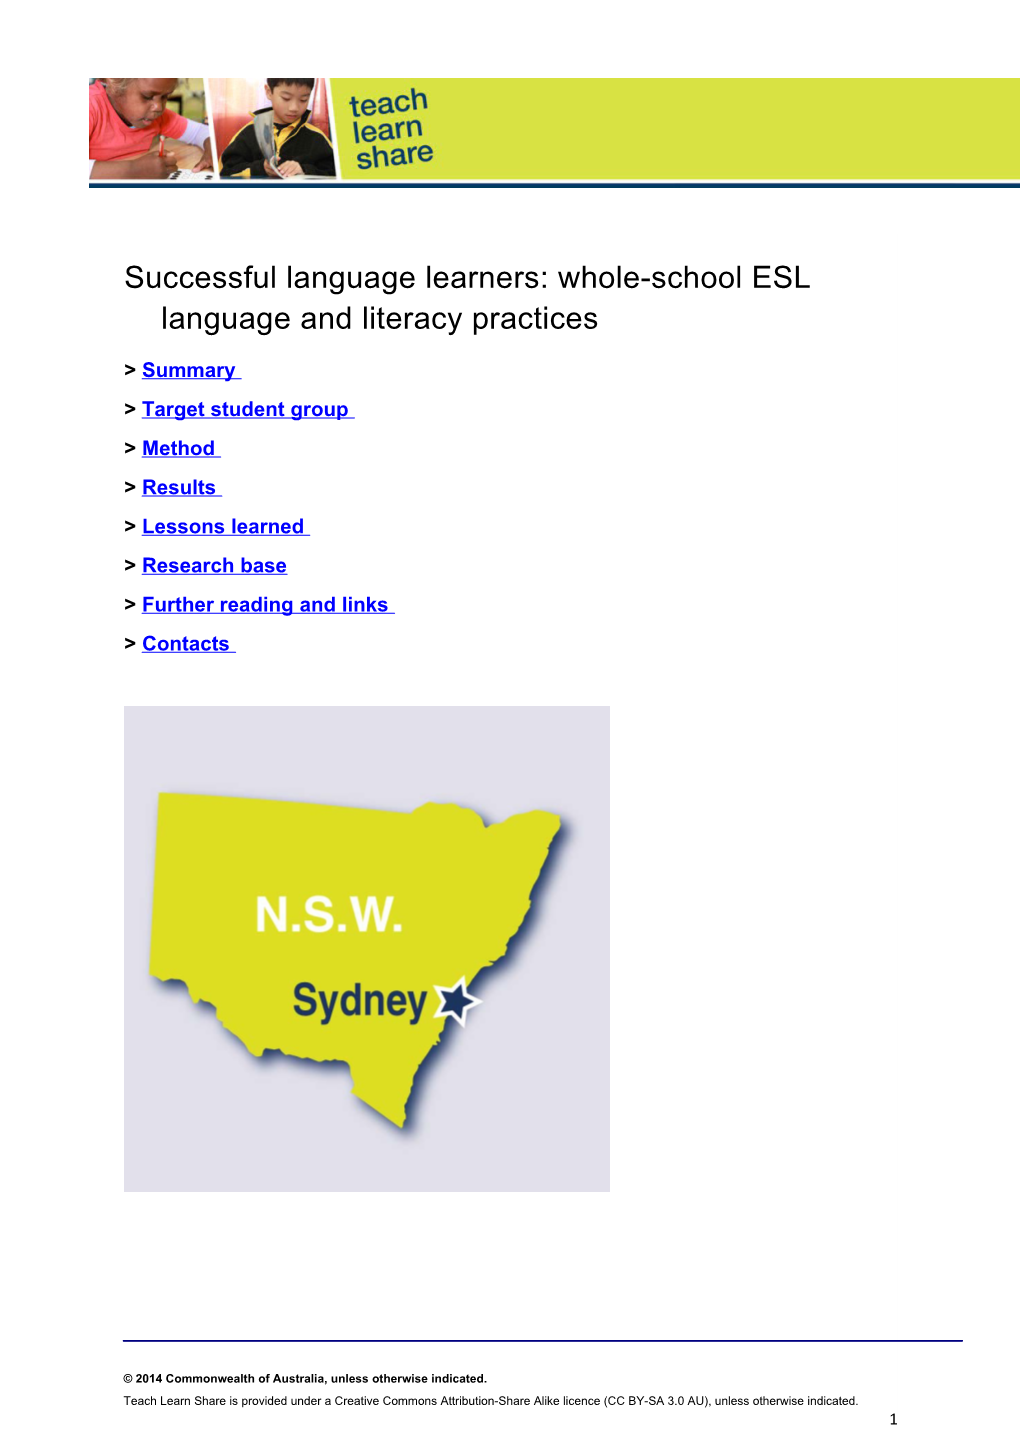 Successful Language Learners: Whole-School ESL Language and Literacy Practices